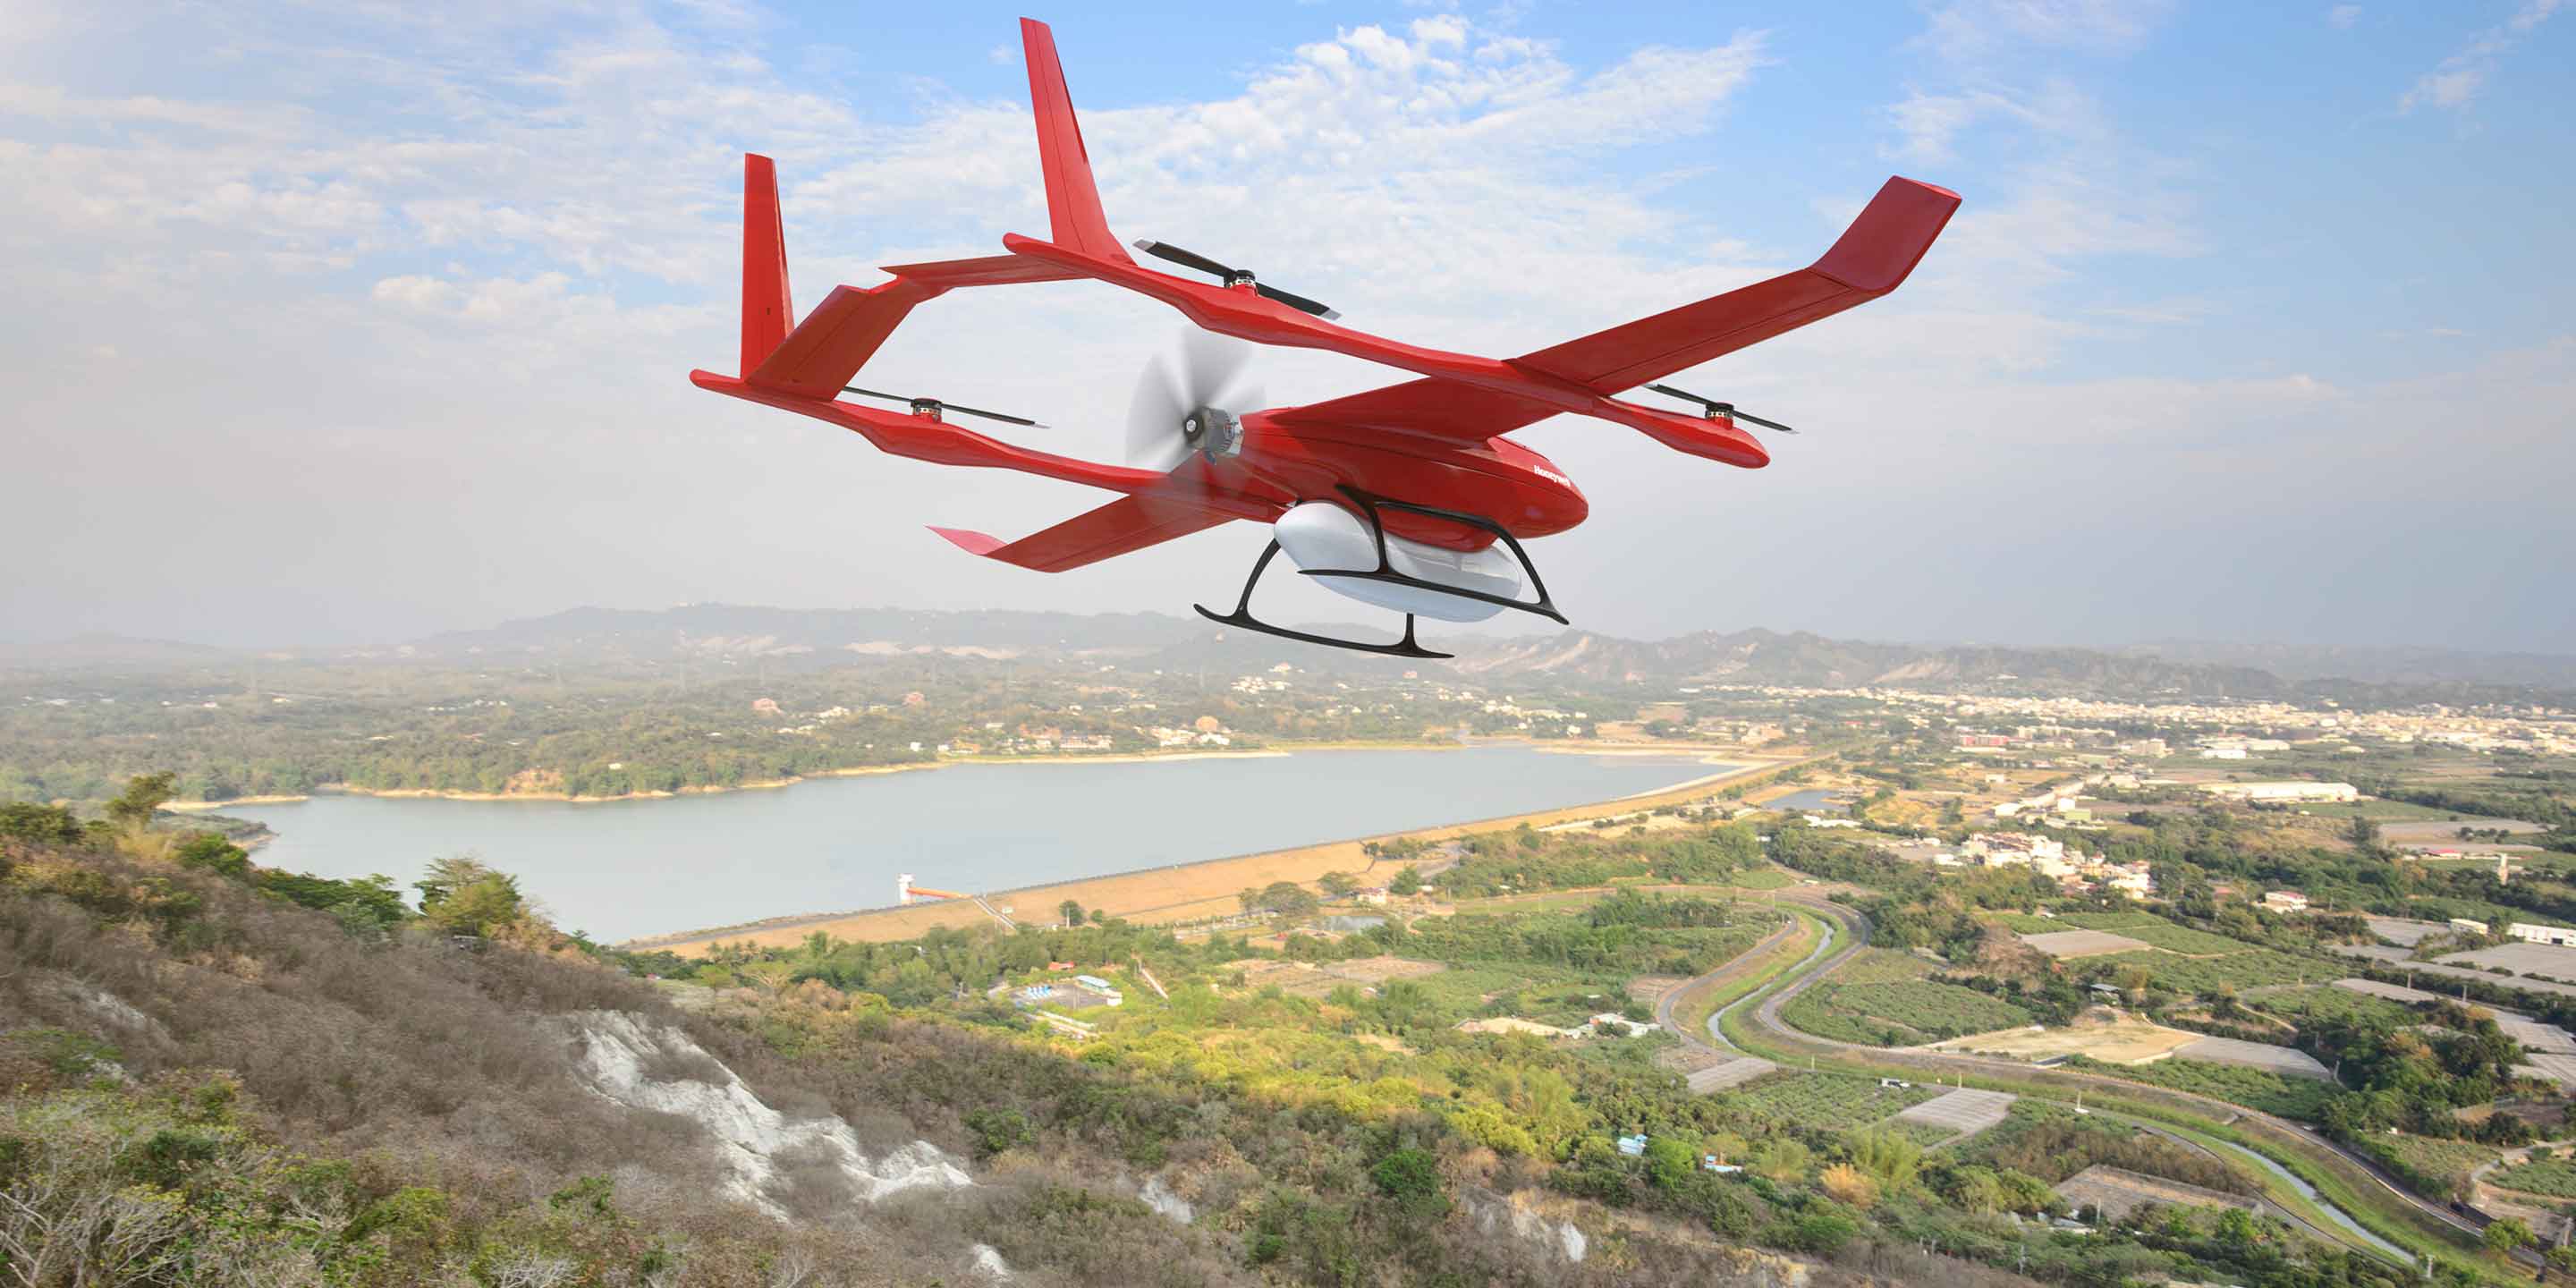 Technology for Small Uncrewed Aerial Systems